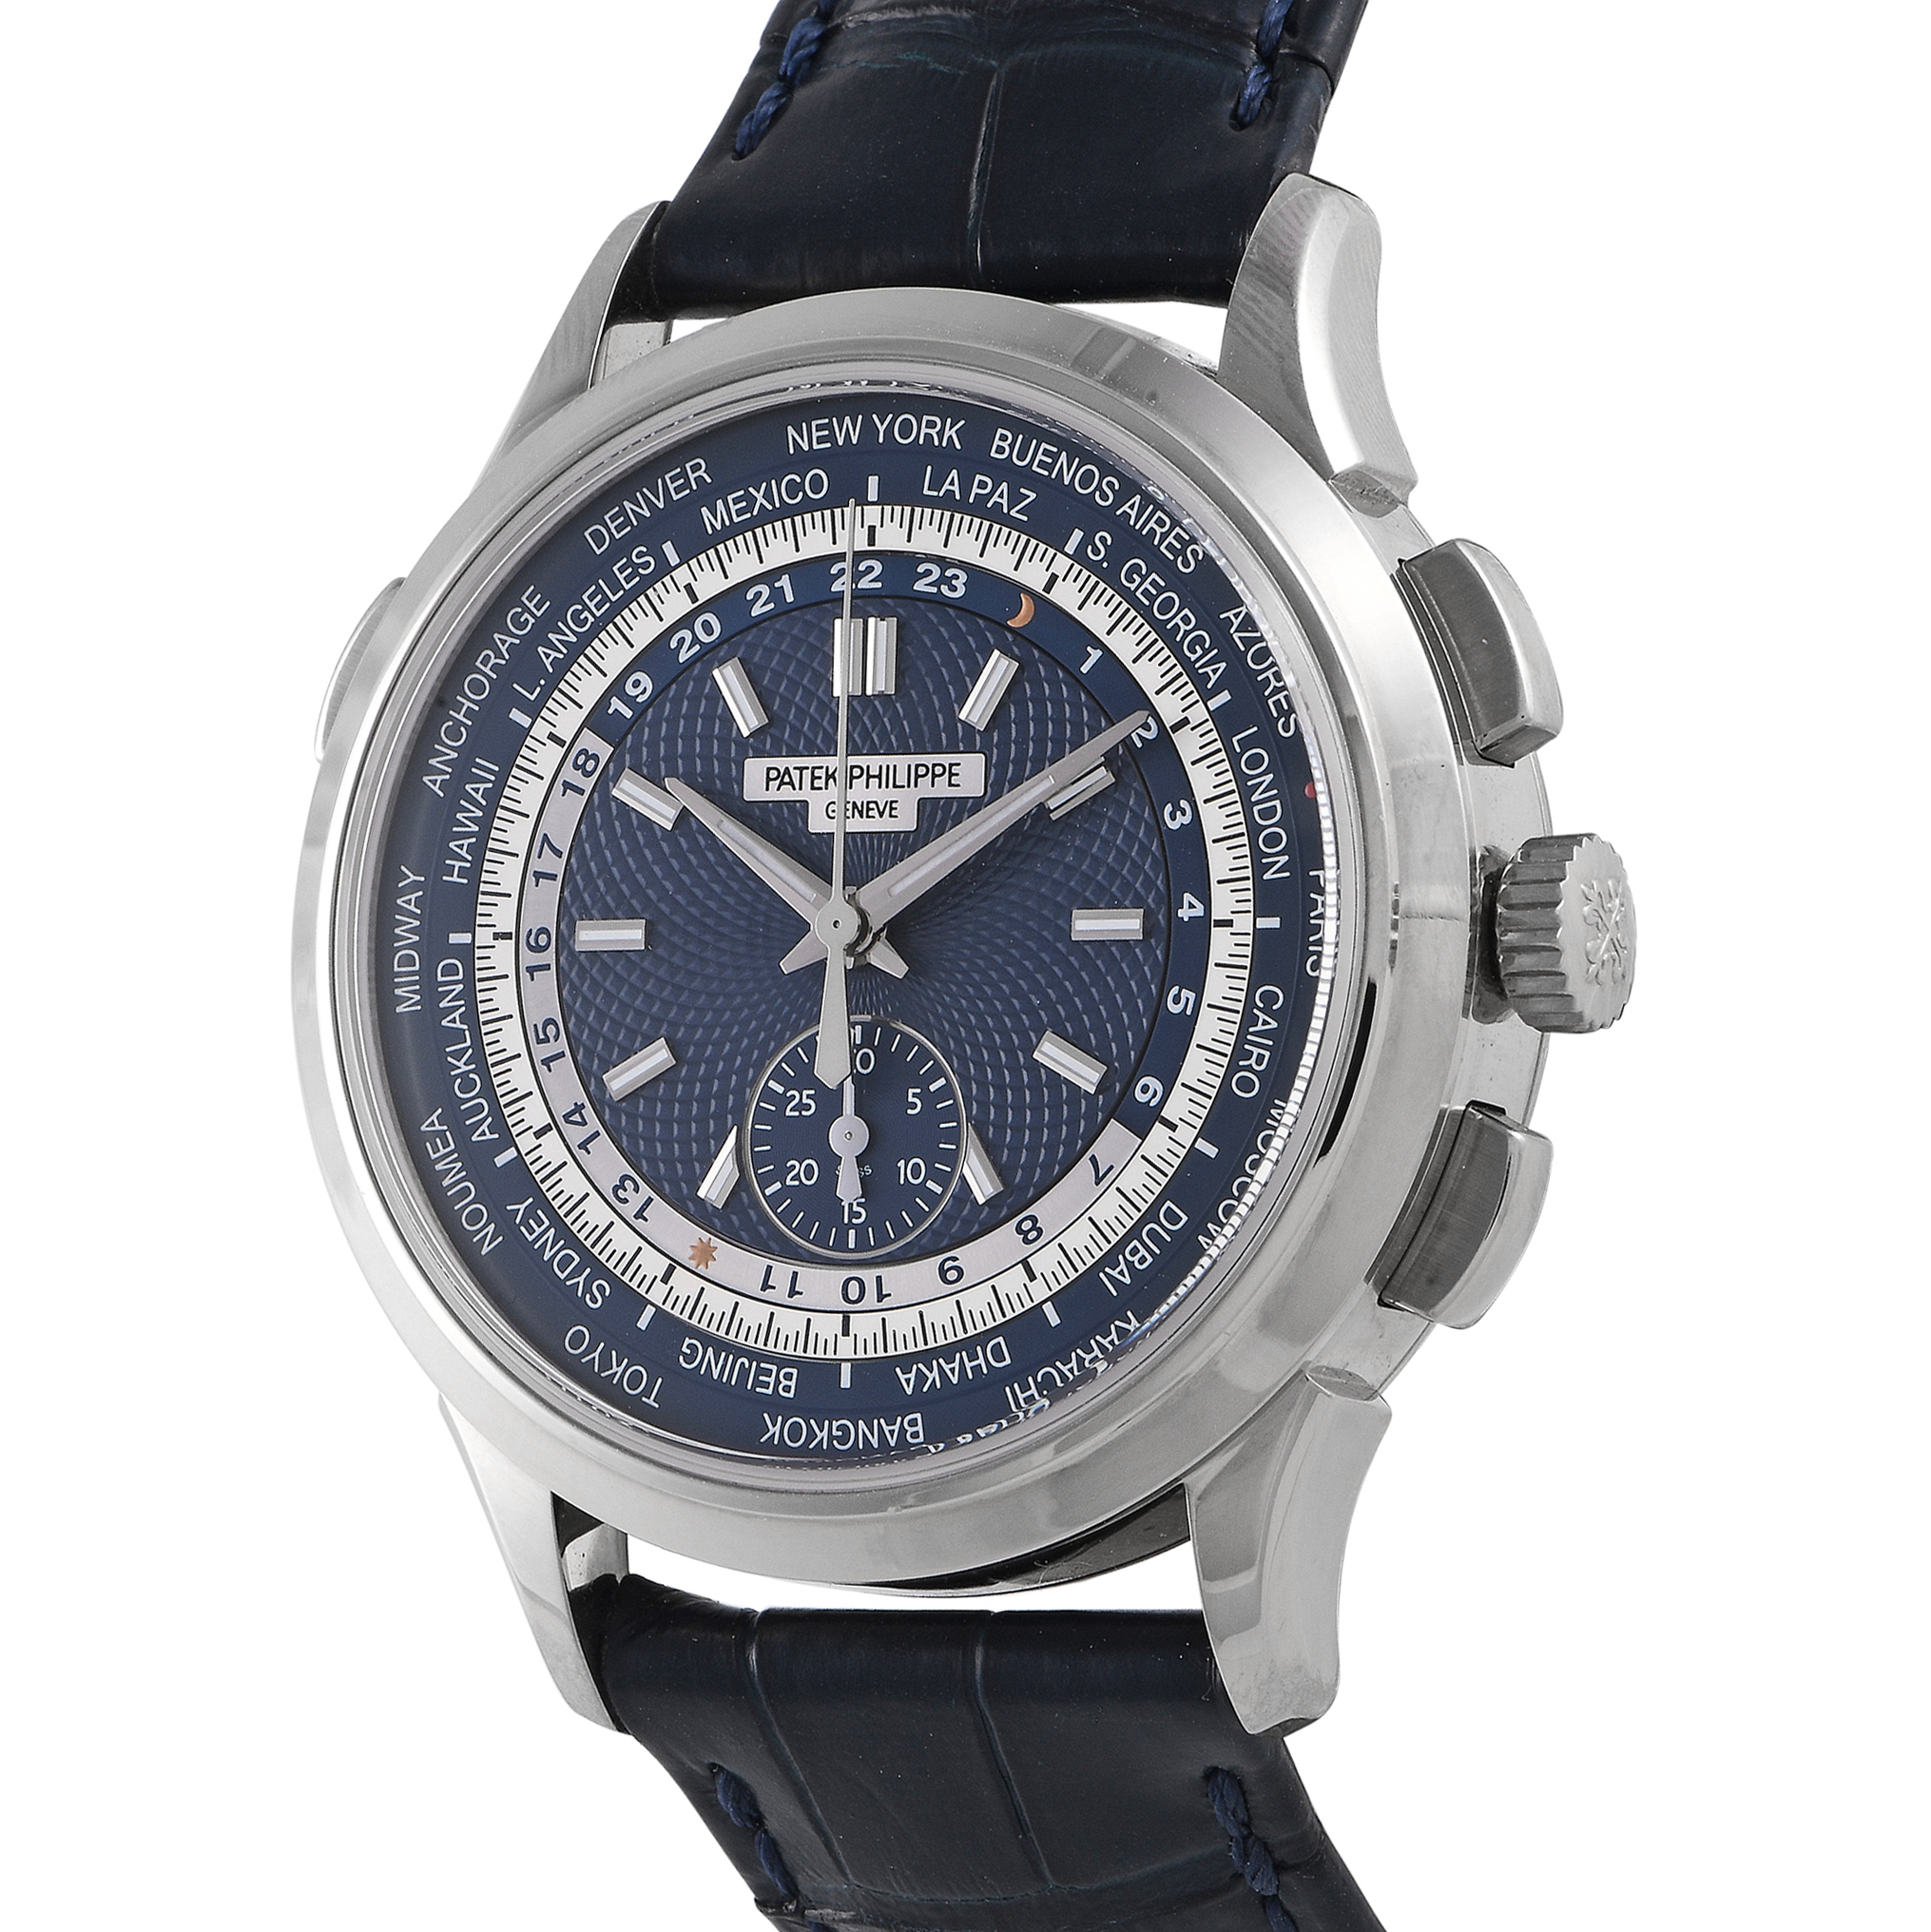 Patek Philippe Complications World Time Chronograph Watch 5930G-010